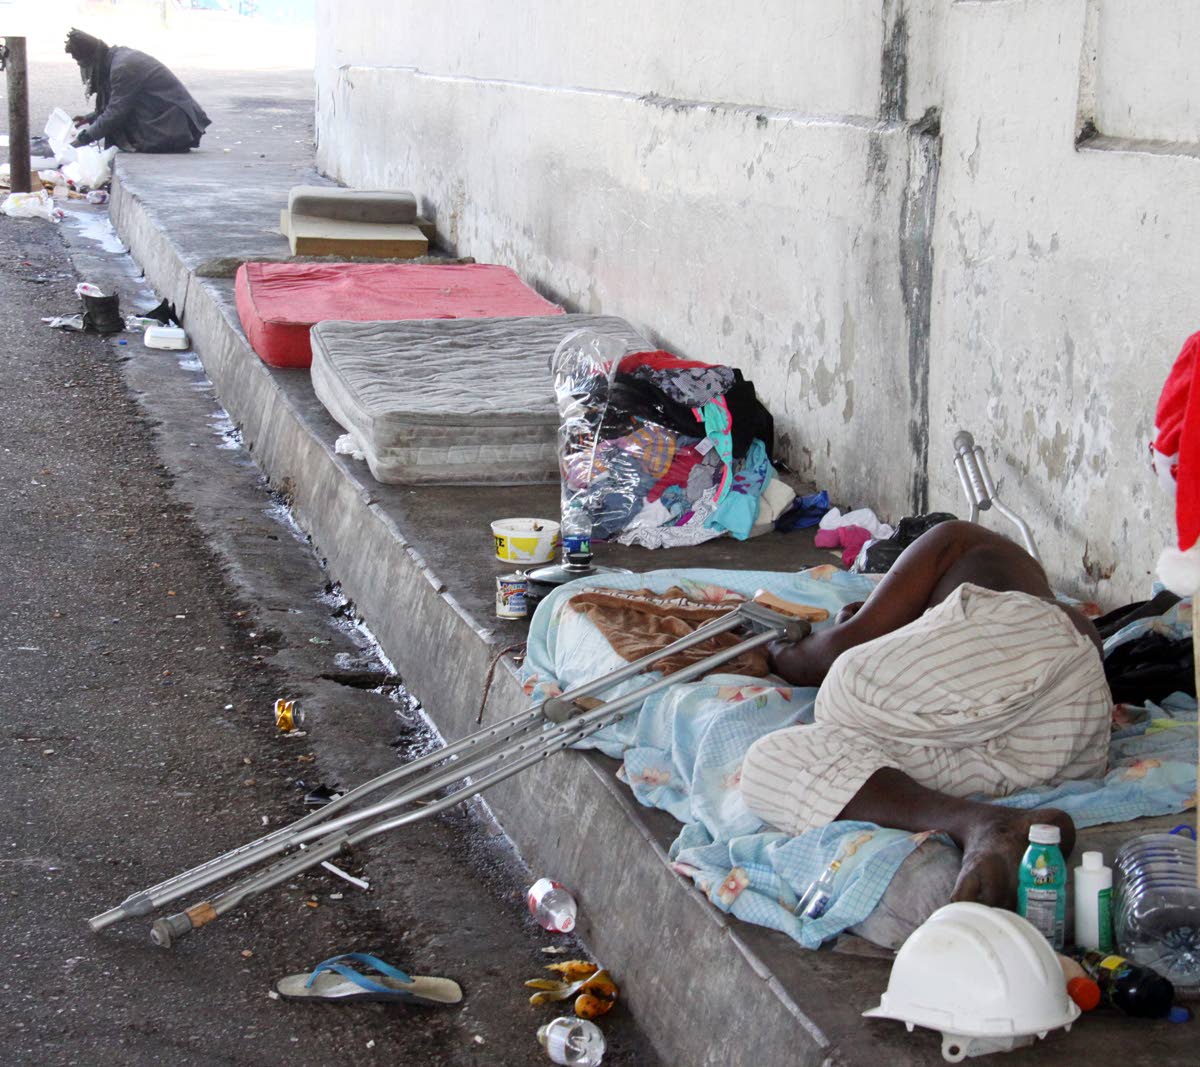 Police investigating death of homeless man in Barataria